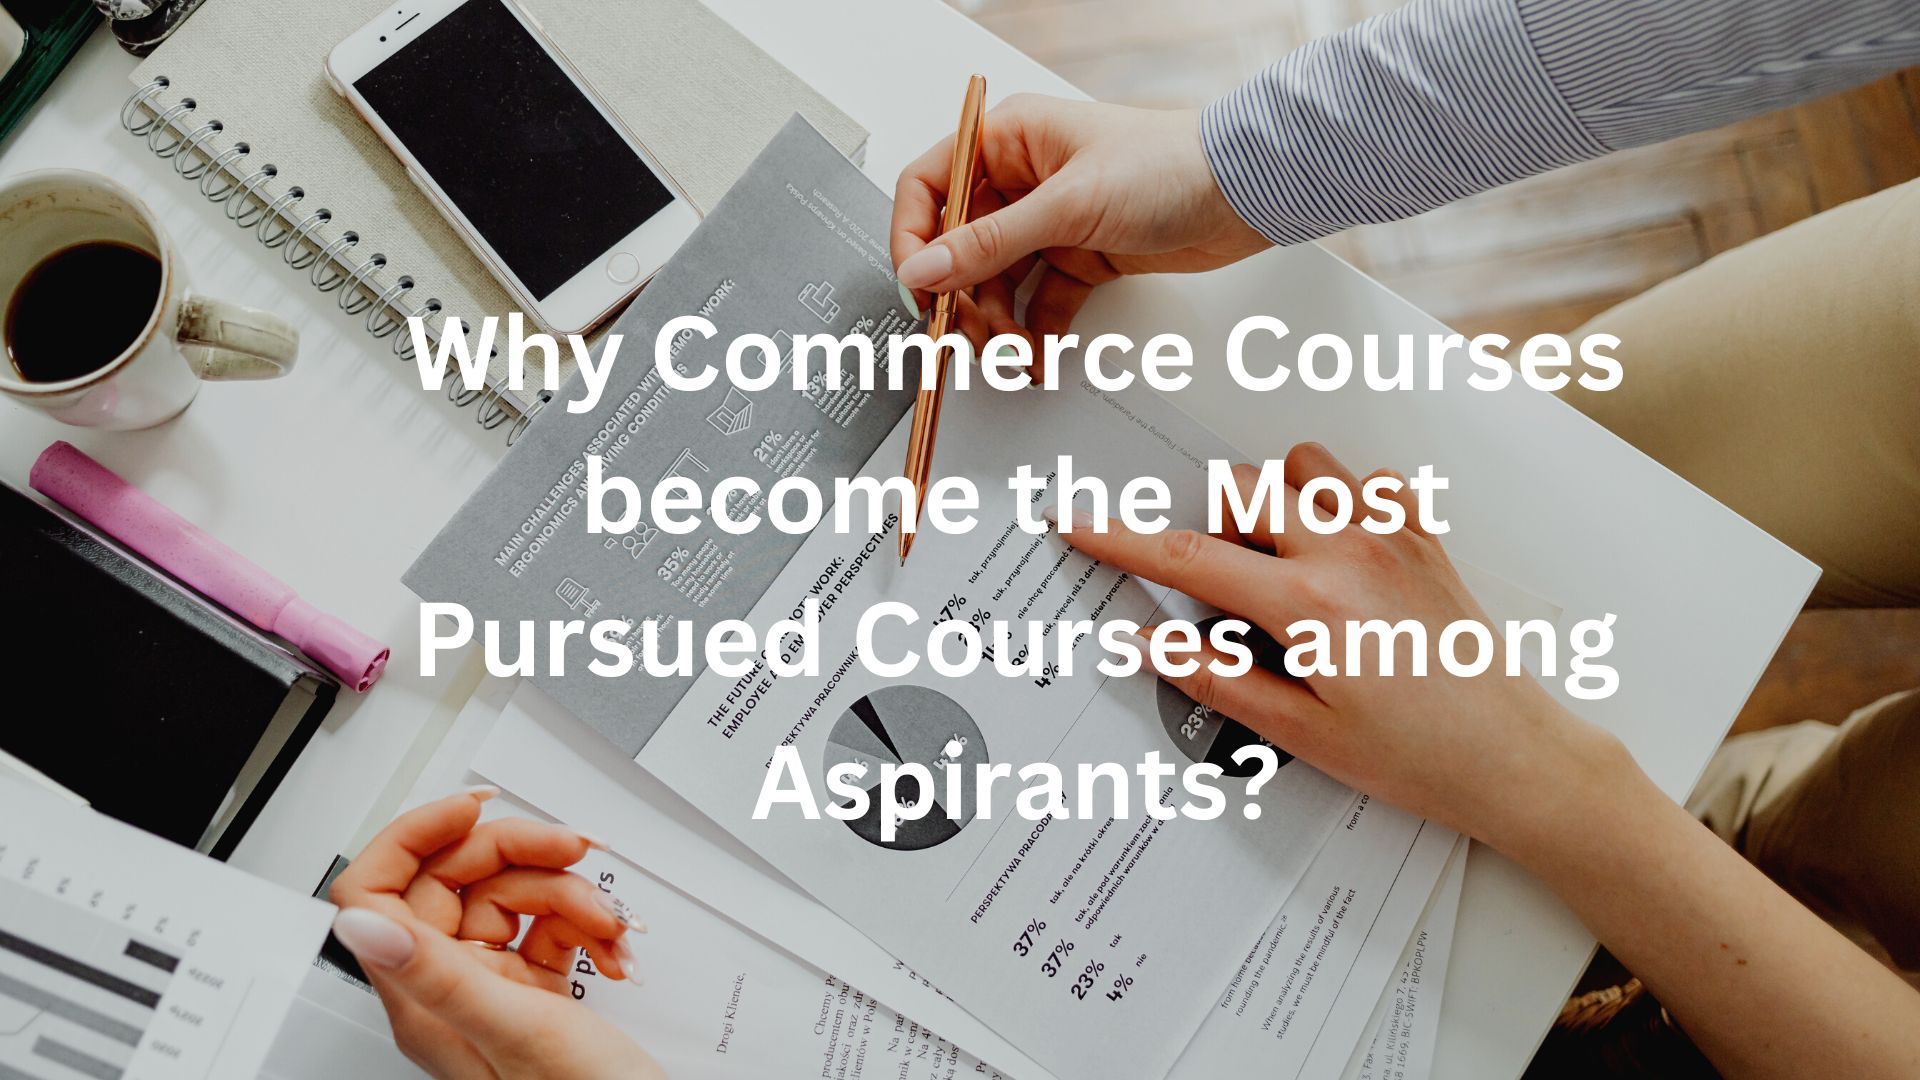 Why Commerce Courses become the Most Pursued Courses among Aspirants?